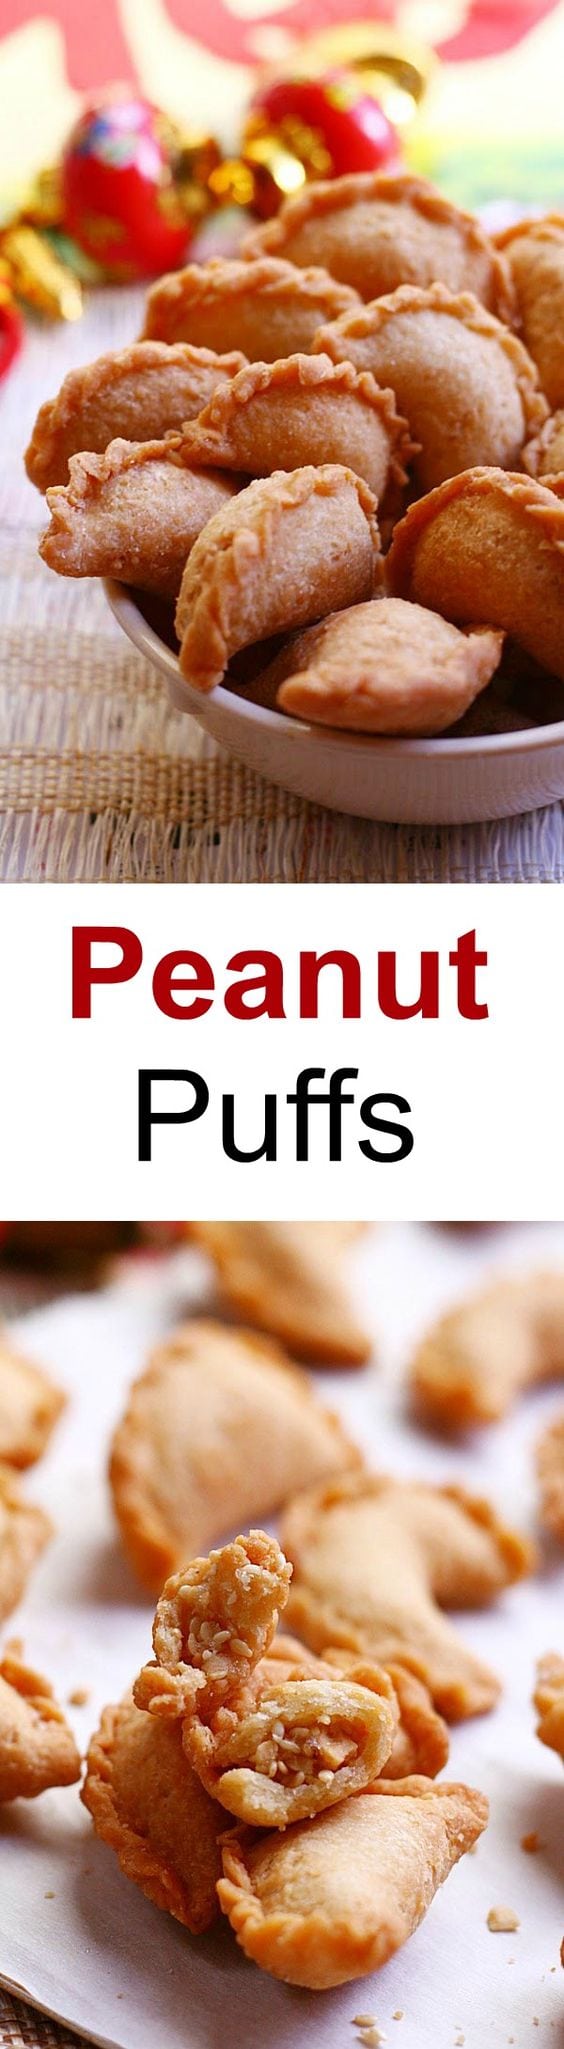 Peanut Puffs - sweet ground peanut wrapped with crispy pastry shell. Deep-fried to golden brown, so addictive and yummy | rasamalaysia.com